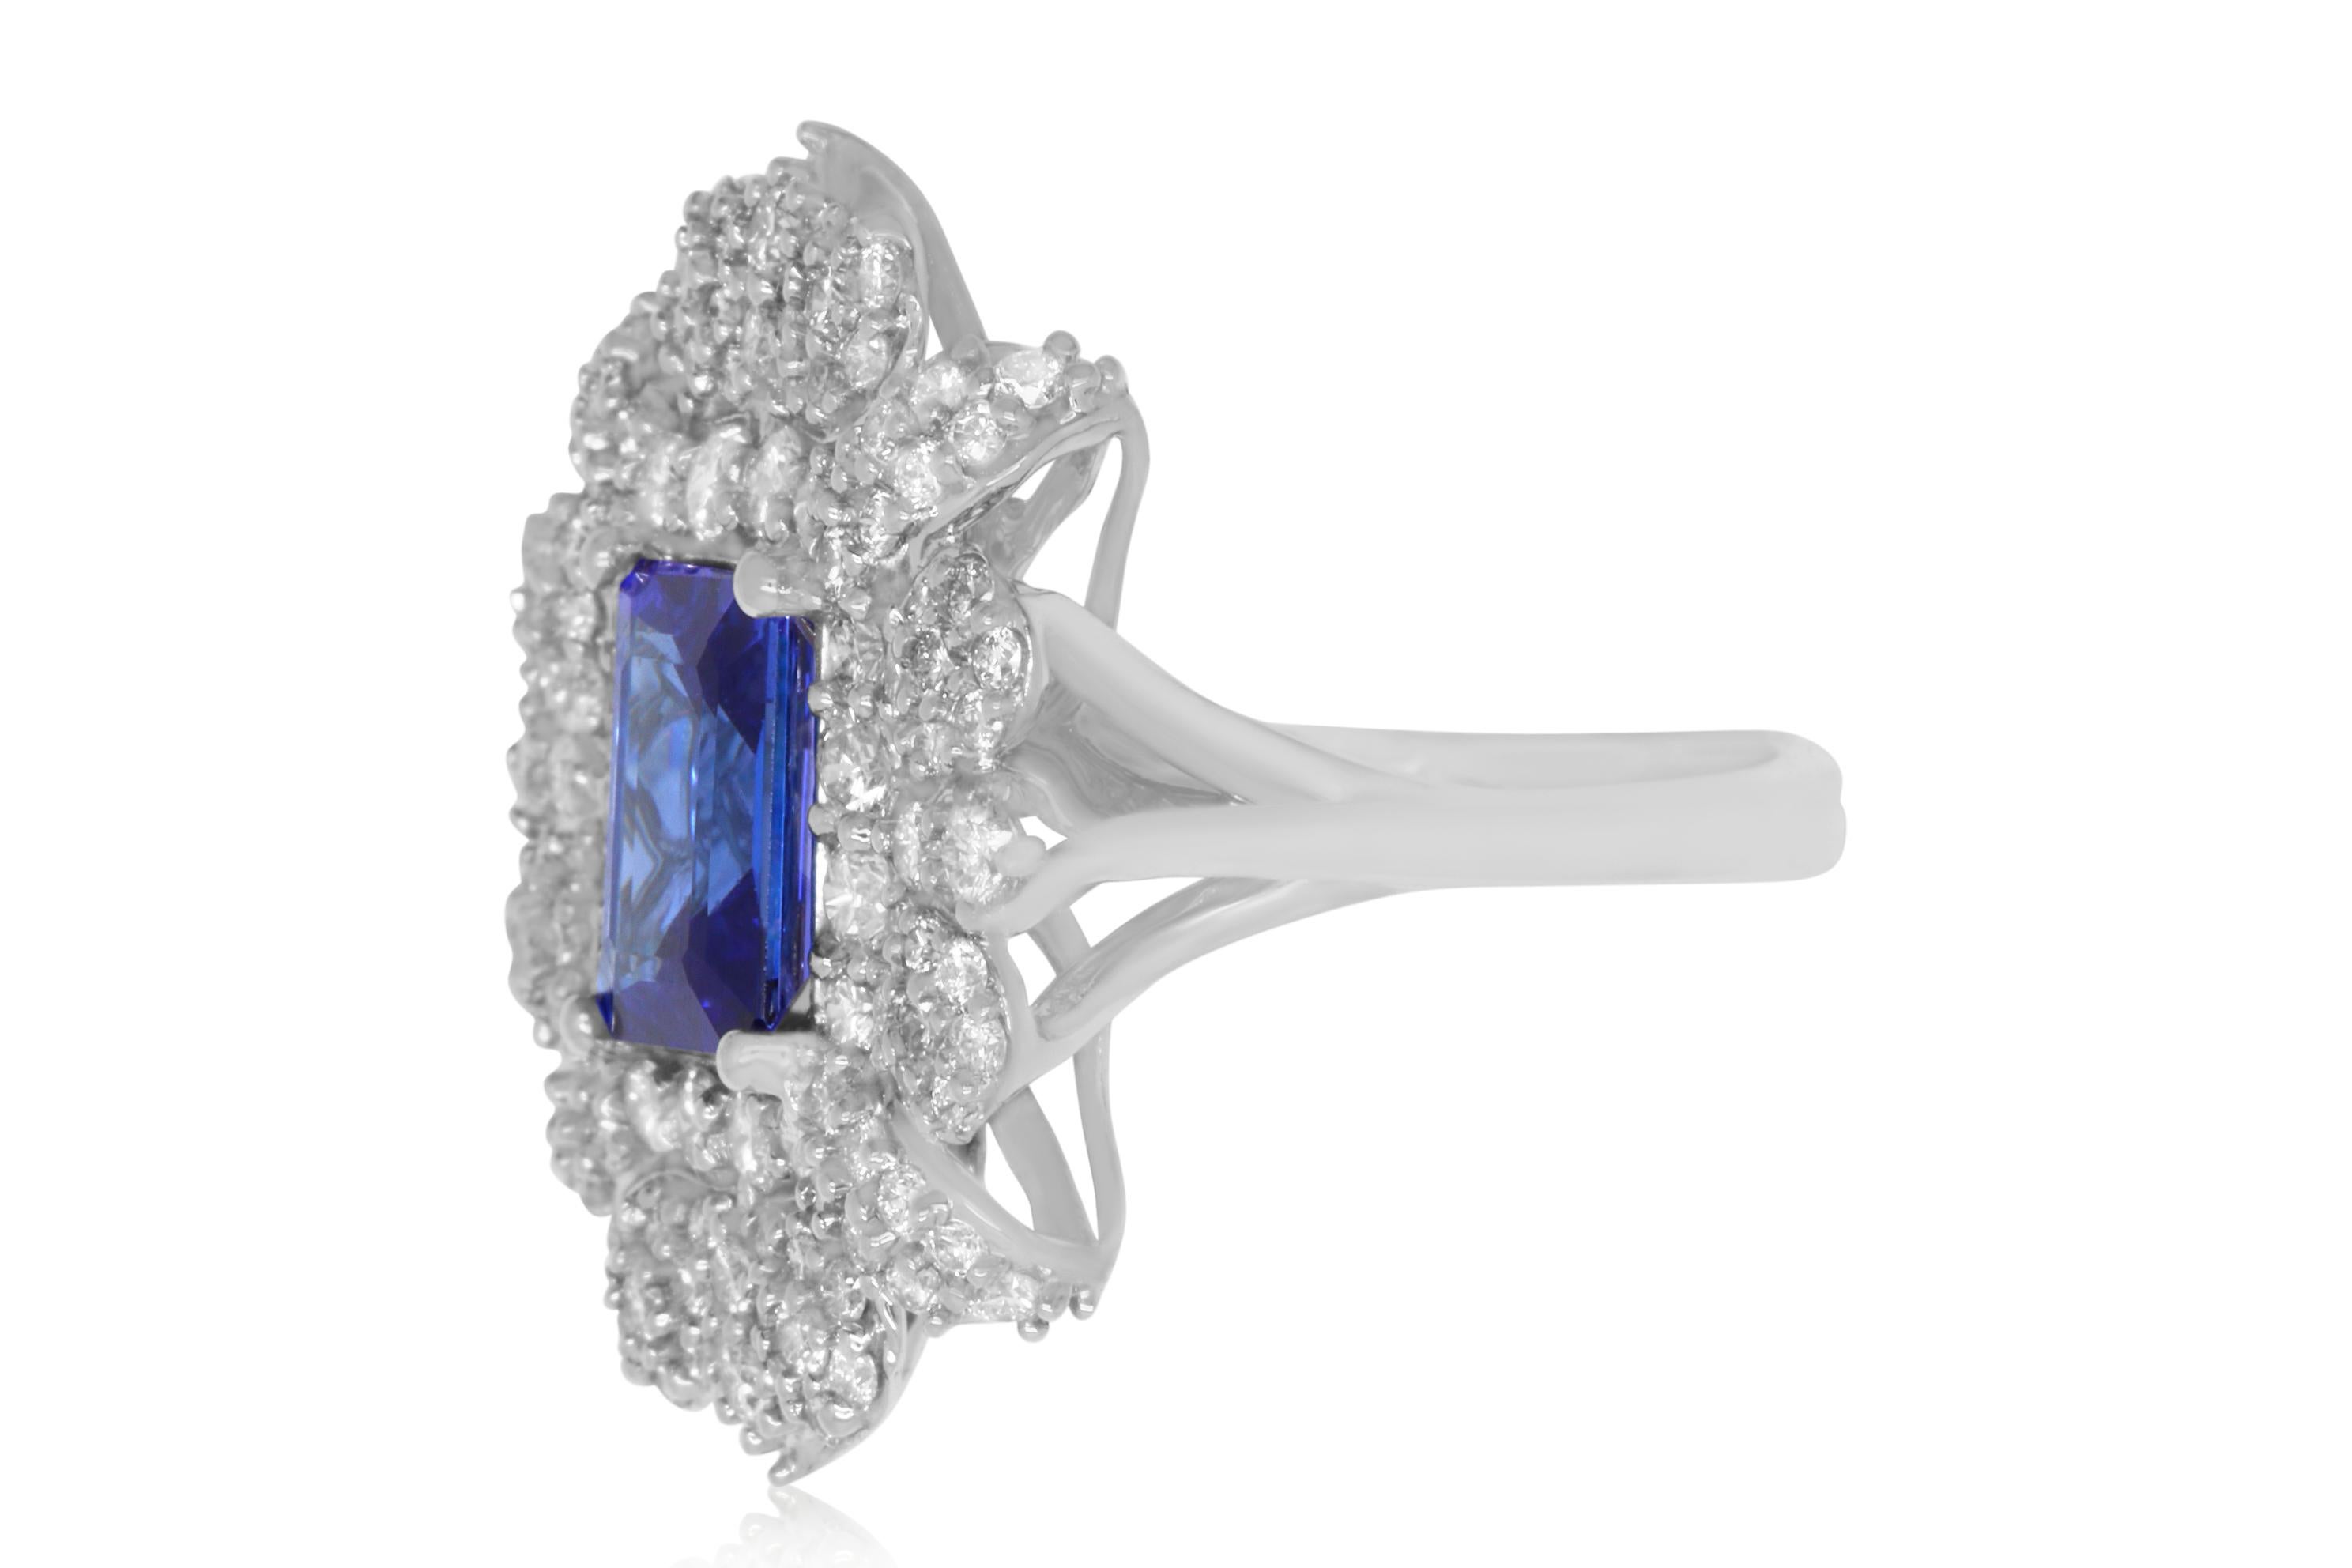 A stunning 2.78 Carat Emerald Cut Tanzanite is framed by dazzling round white diamonds totaling 2.22 Carats. A beautiful and chic design for colored jewelry lovers everywhere!

Material: 14k White Gold
Gemstones: 1 Emerald Cut Tanzanite at 2.78